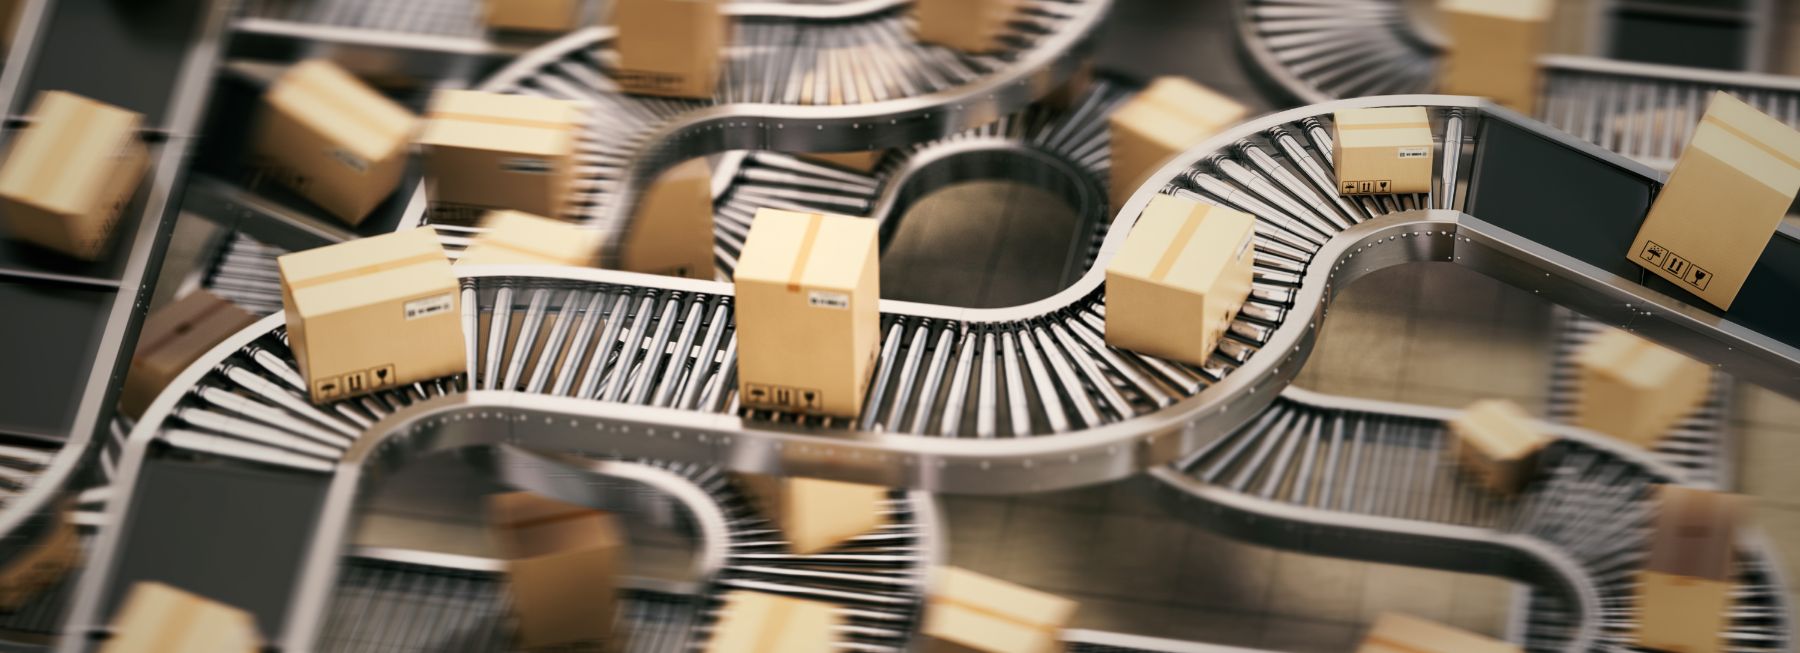 Can packaging companies really embrace market dynamics?